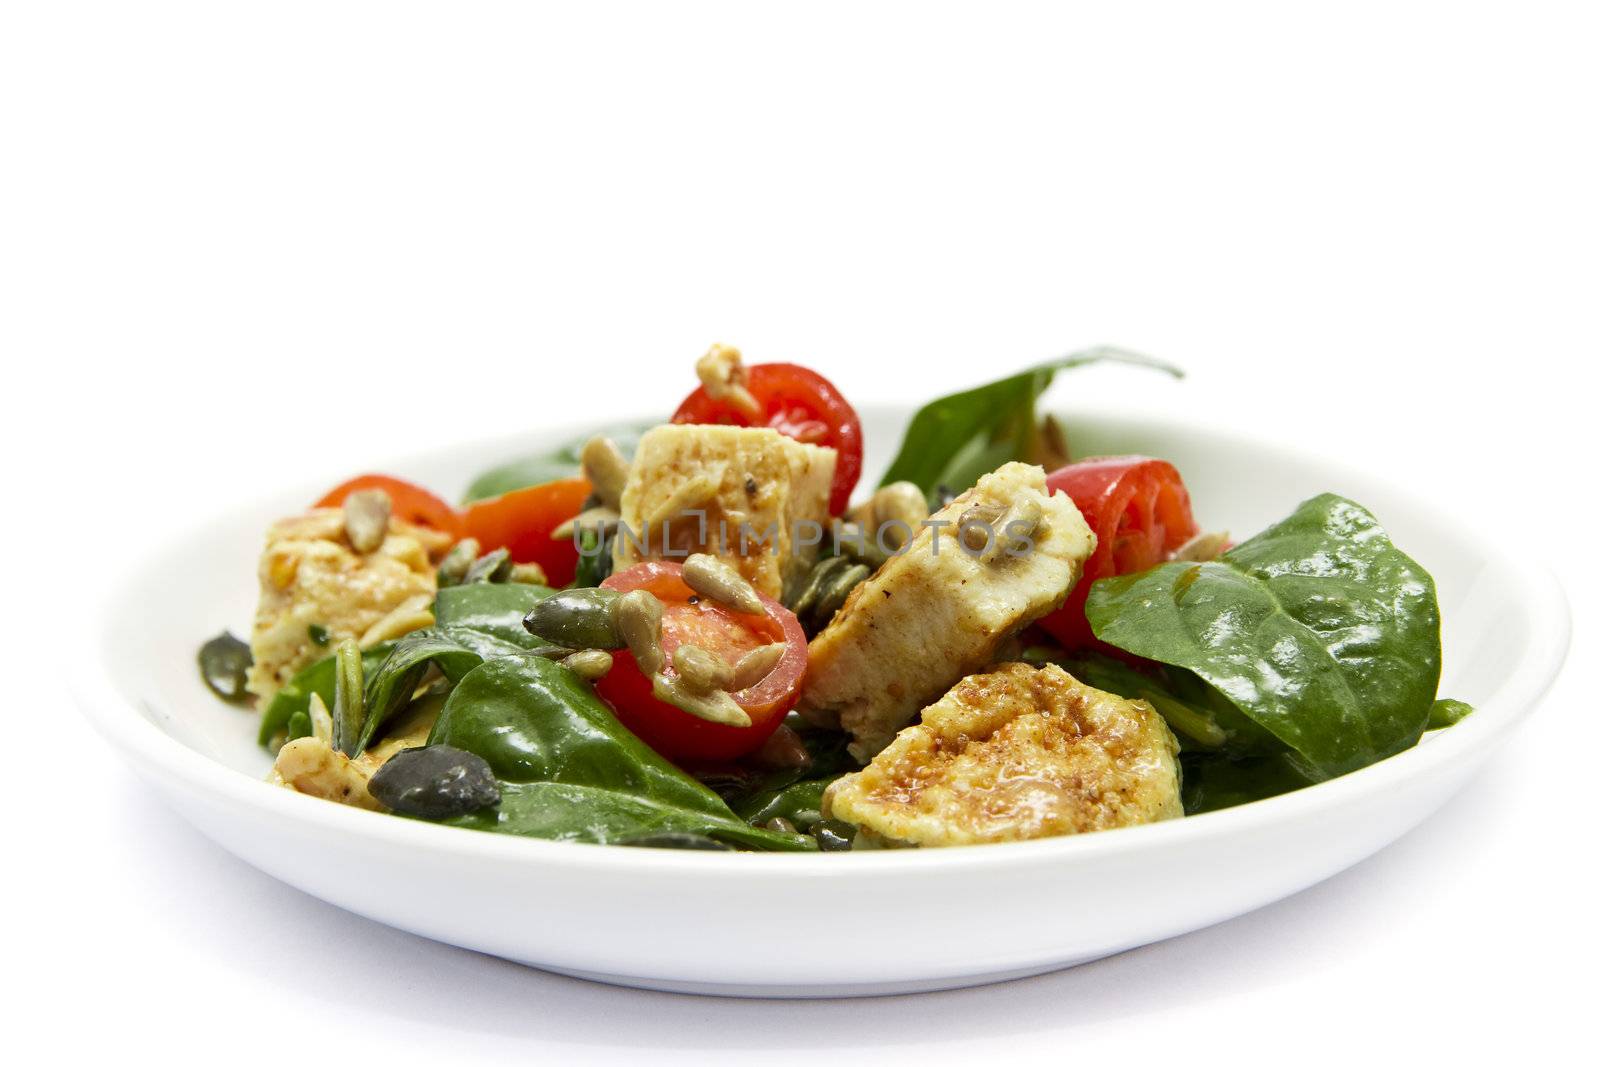 Spinach and chicken salad over white background